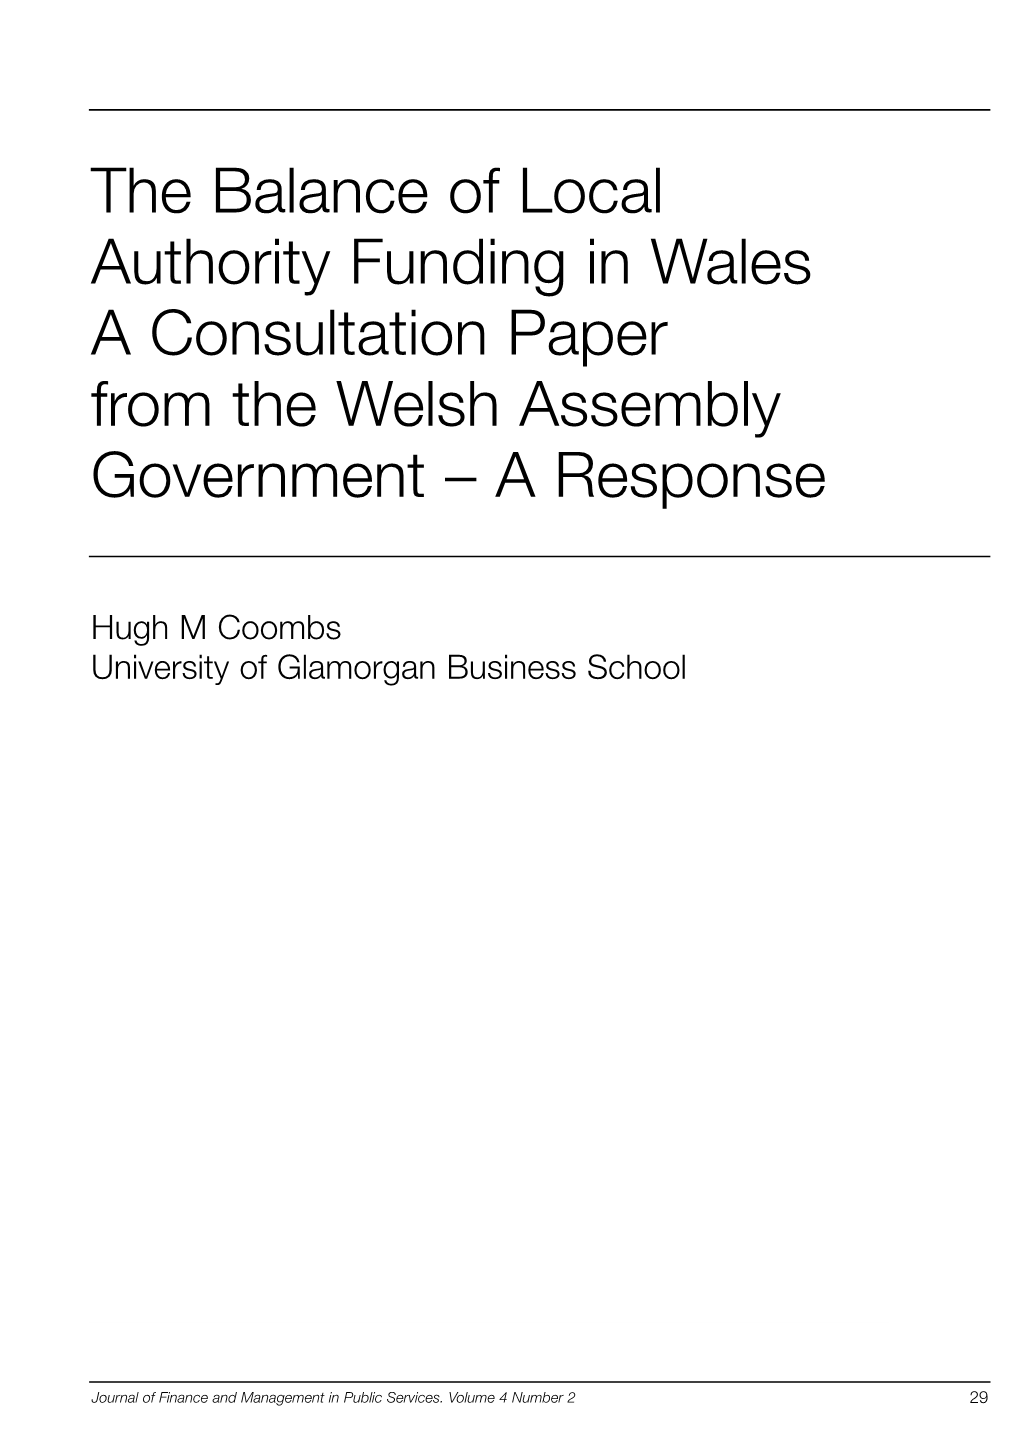 The Balance of Local Authority Funding in Wales a Consultation Paper from the Welsh Assembly Government – a Response